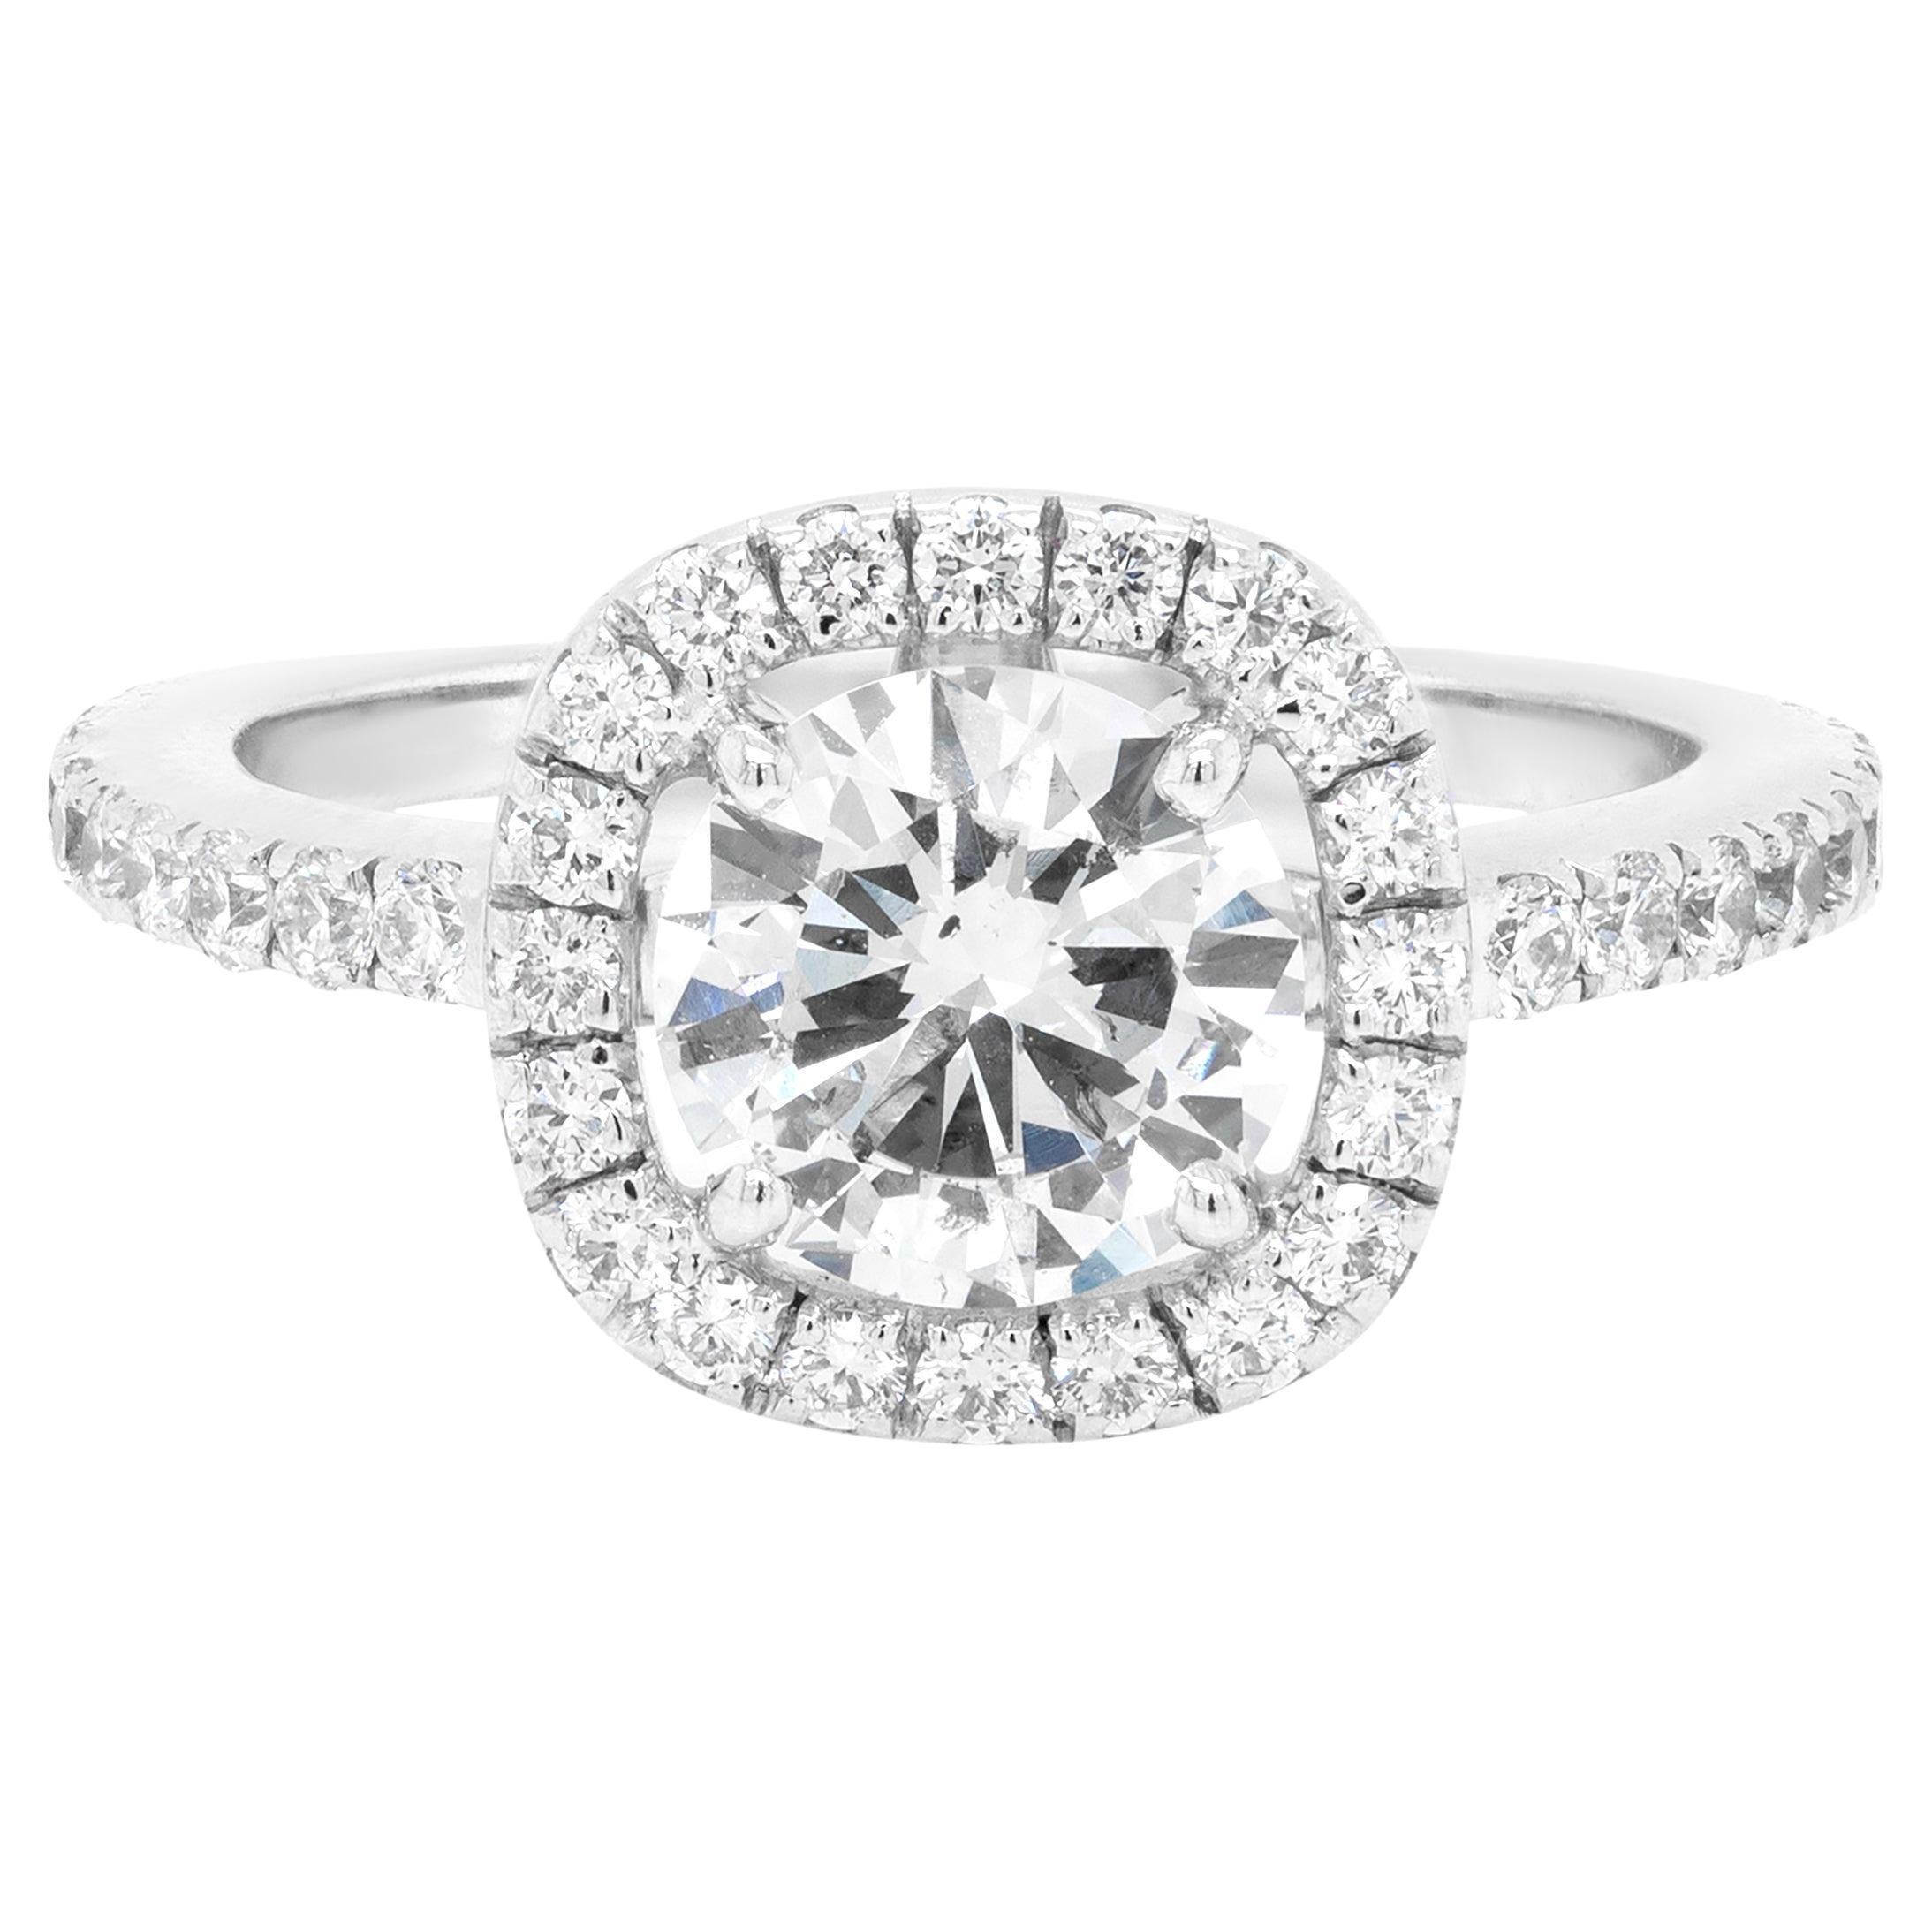 1.04 Carat H SI1 Diamond 18 Carat White Gold Halo Engagement Ring For Sale